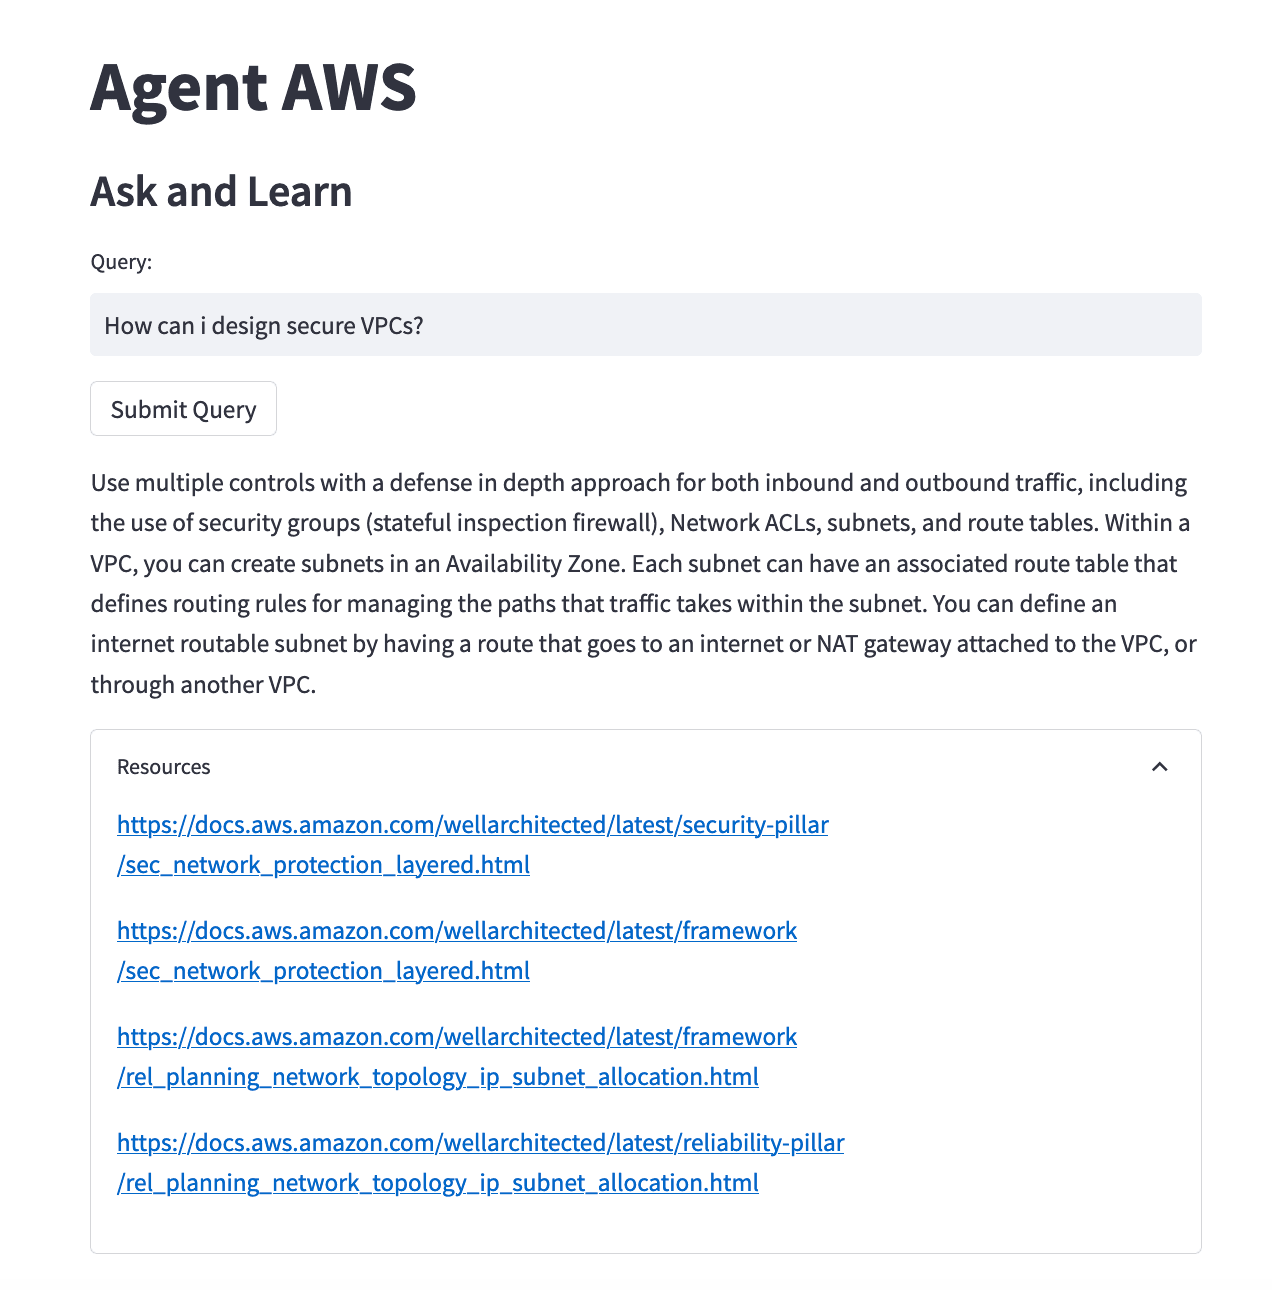 Agent AWS gets answer to customer question